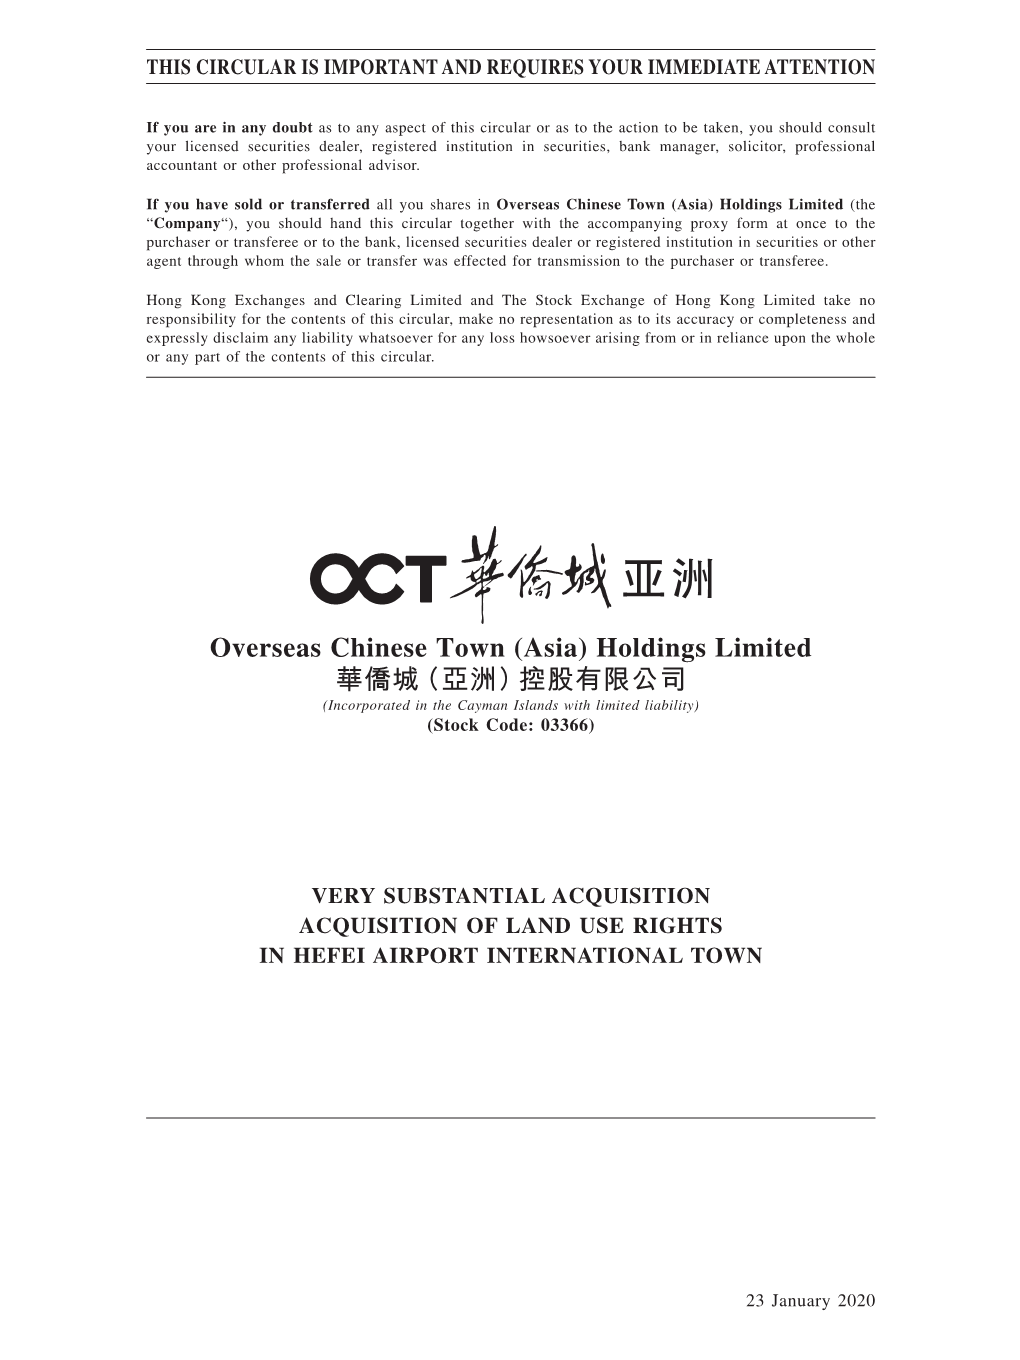 Overseas Chinese Town (Asia) Holdings Limited 華僑城（亞洲）控股有限公司 (Incorporated in the Cayman Islands with Limited Liability) (Stock Code: 03366)